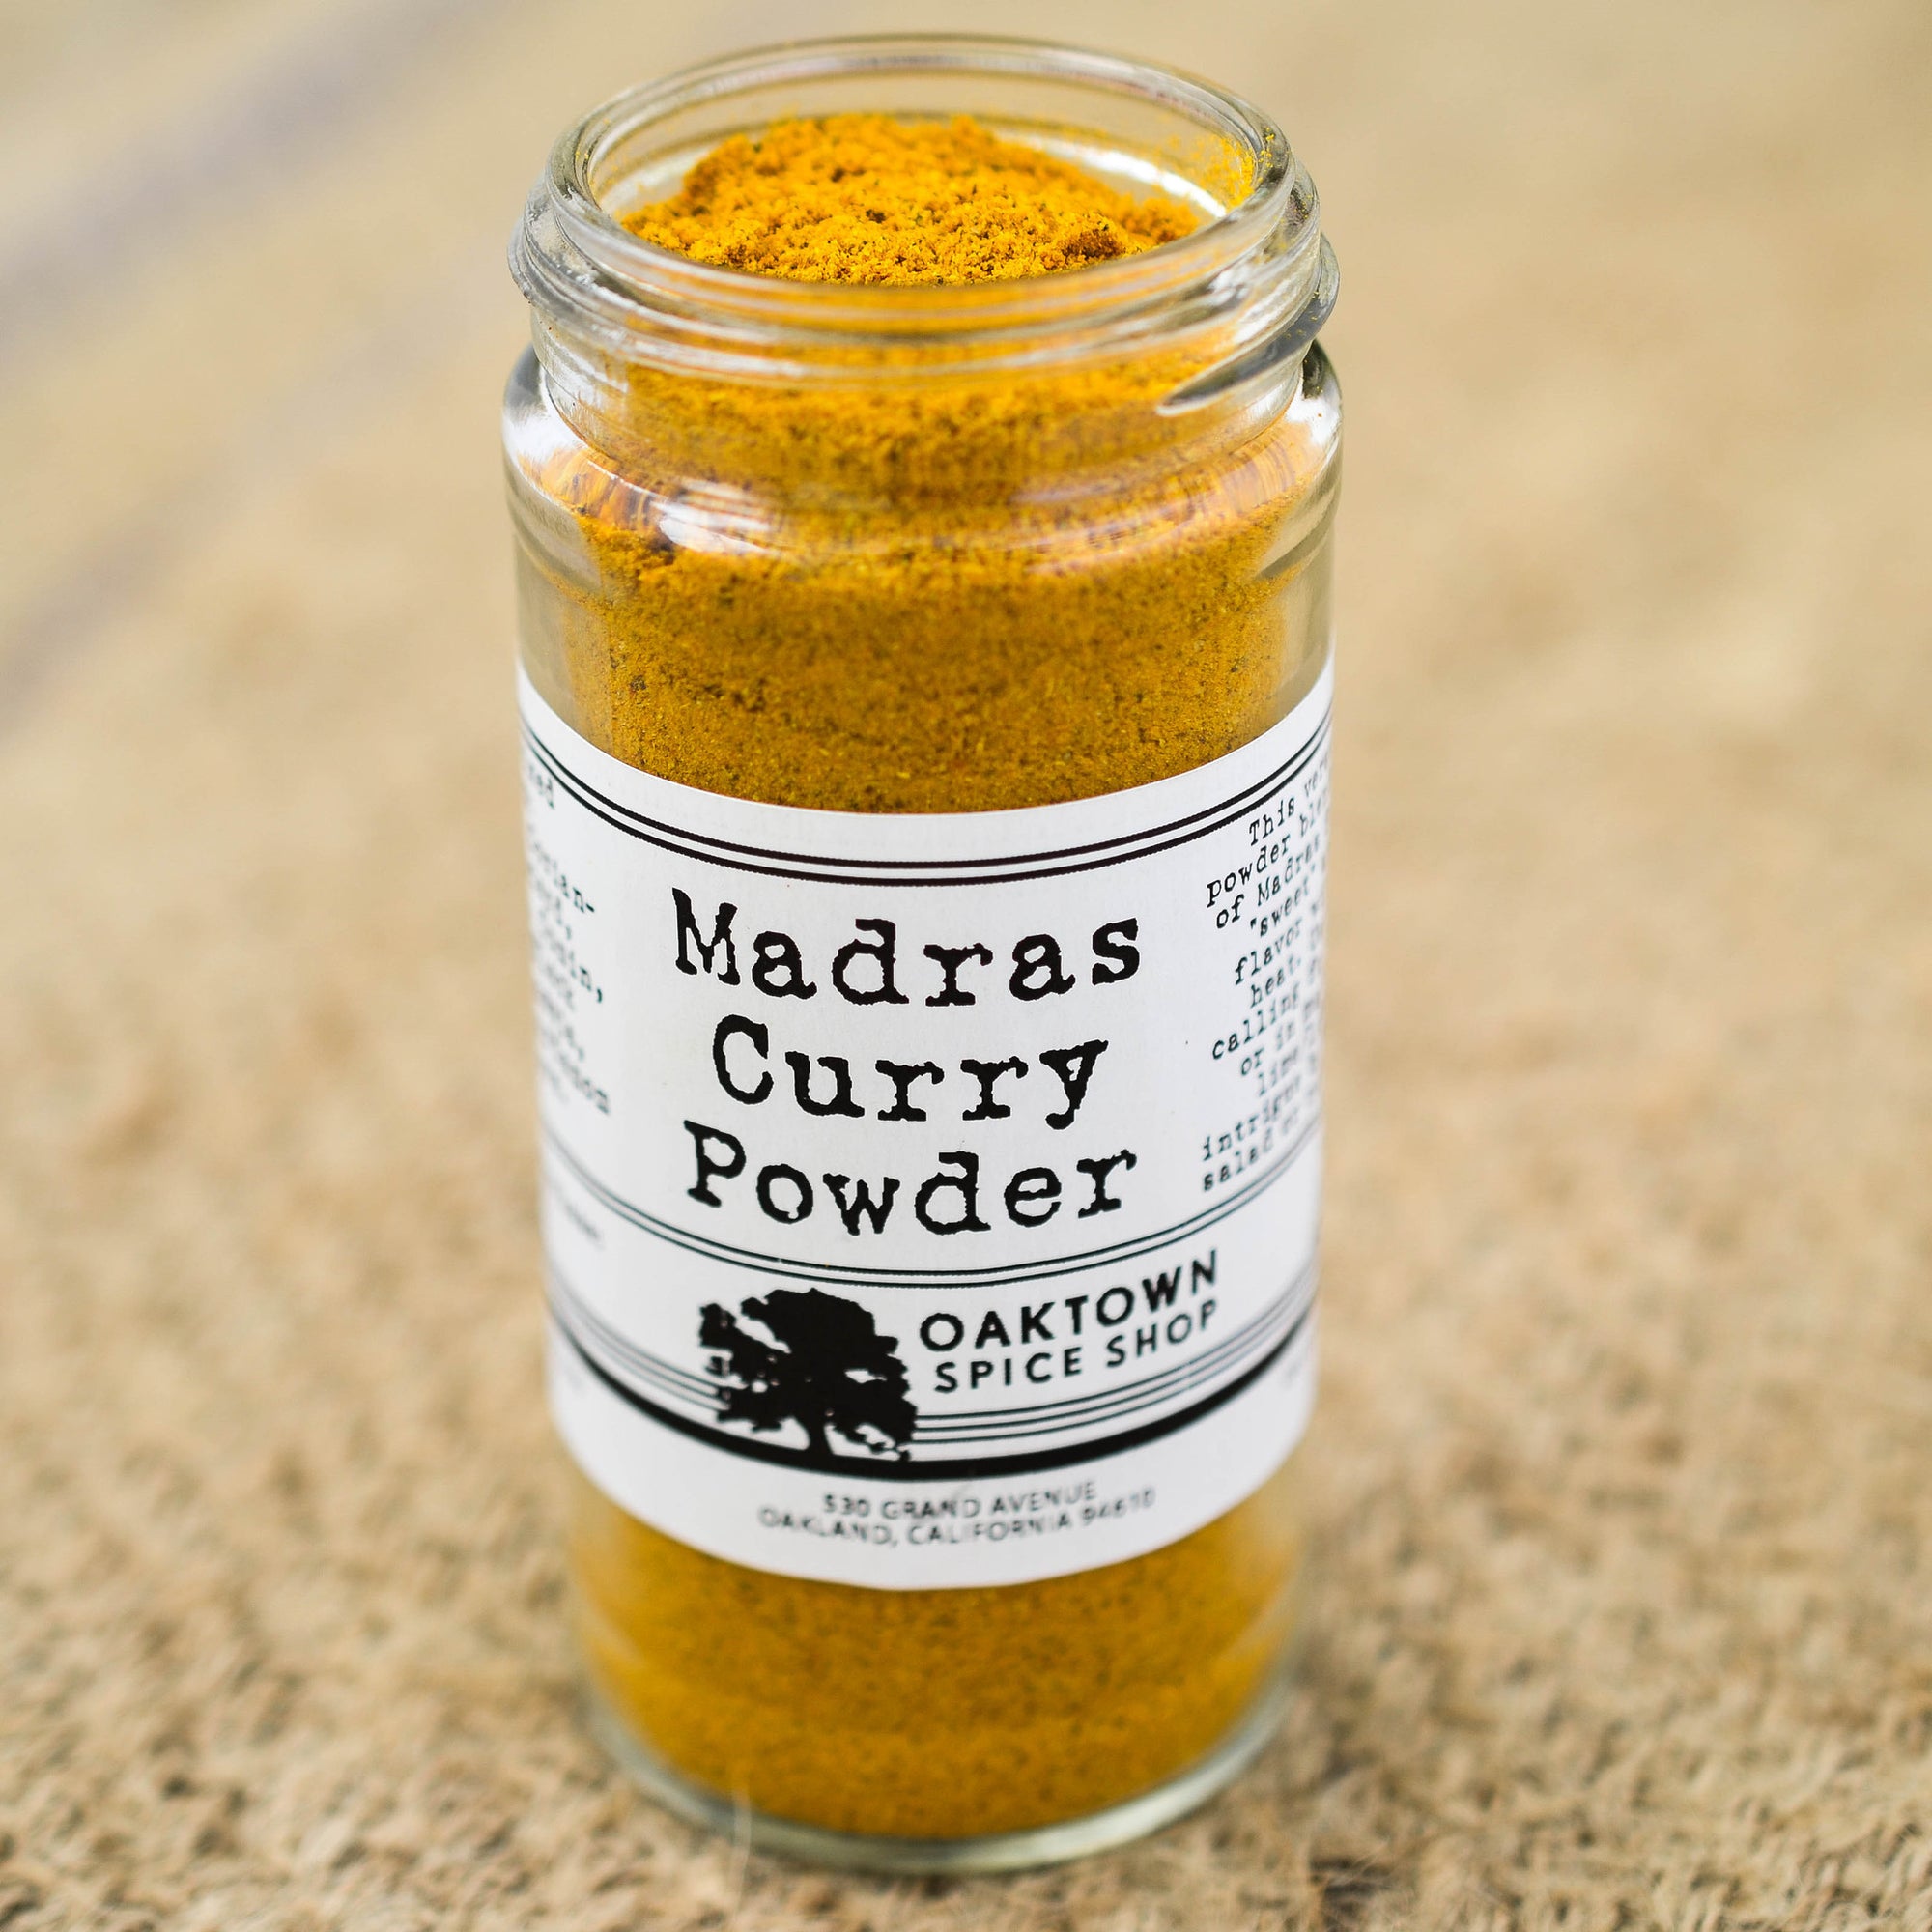 Madras Curry Powder by Oaktown Spice Shop blends the flavors of Madras for a balanced sweetness of cinnamon, cardamom and fenugreek and a touch of cayenne heat